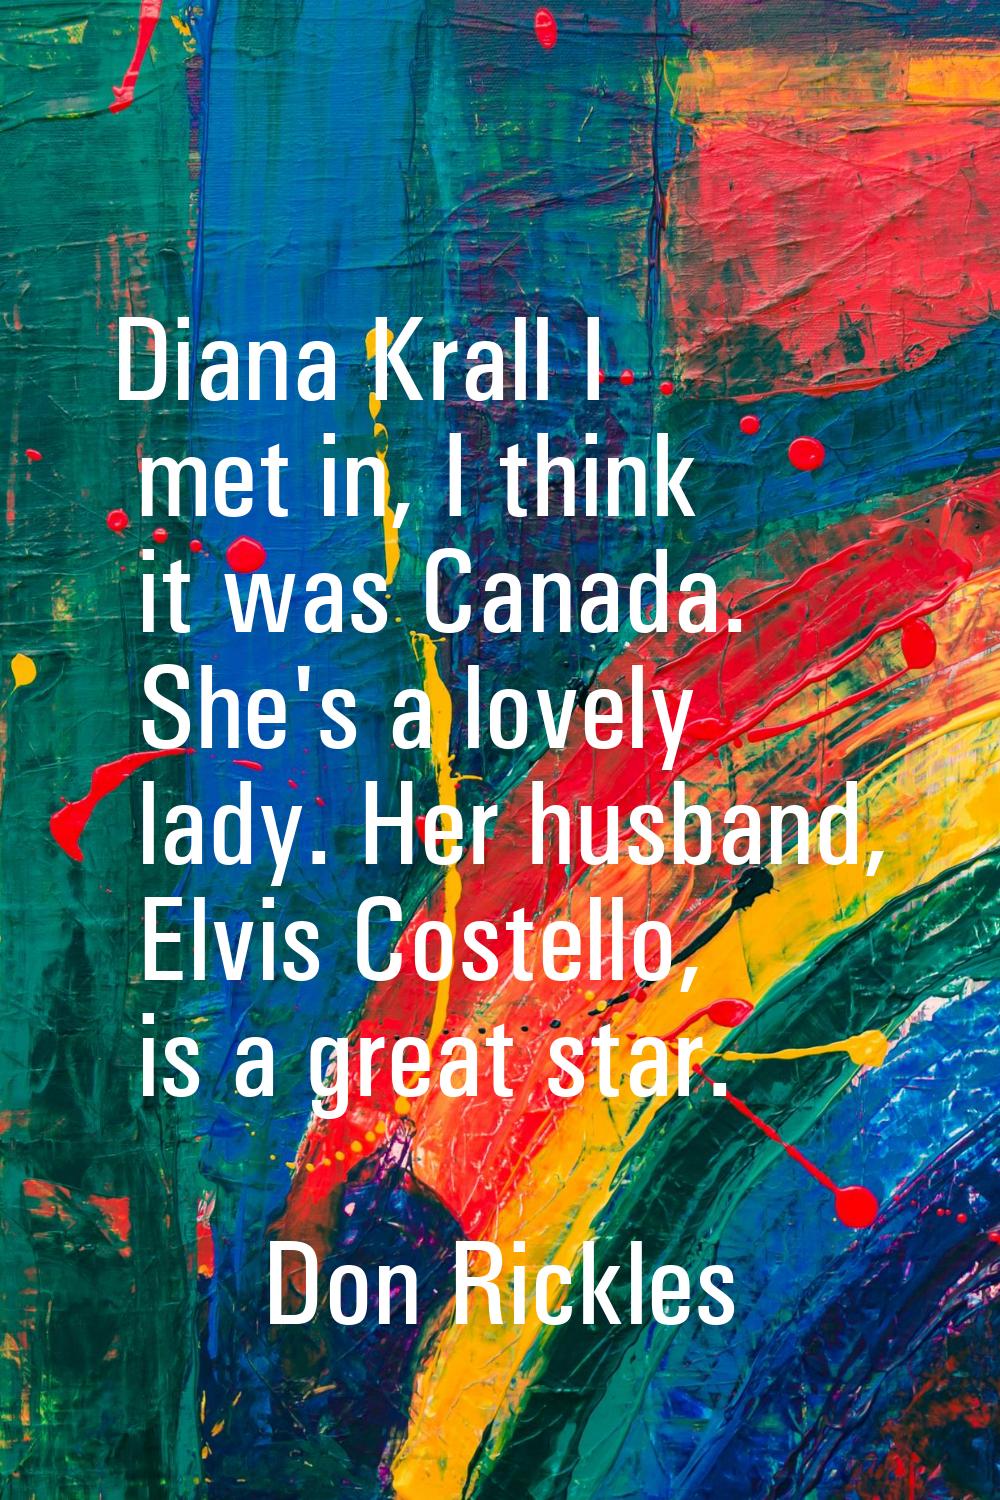 Diana Krall I met in, I think it was Canada. She's a lovely lady. Her husband, Elvis Costello, is a